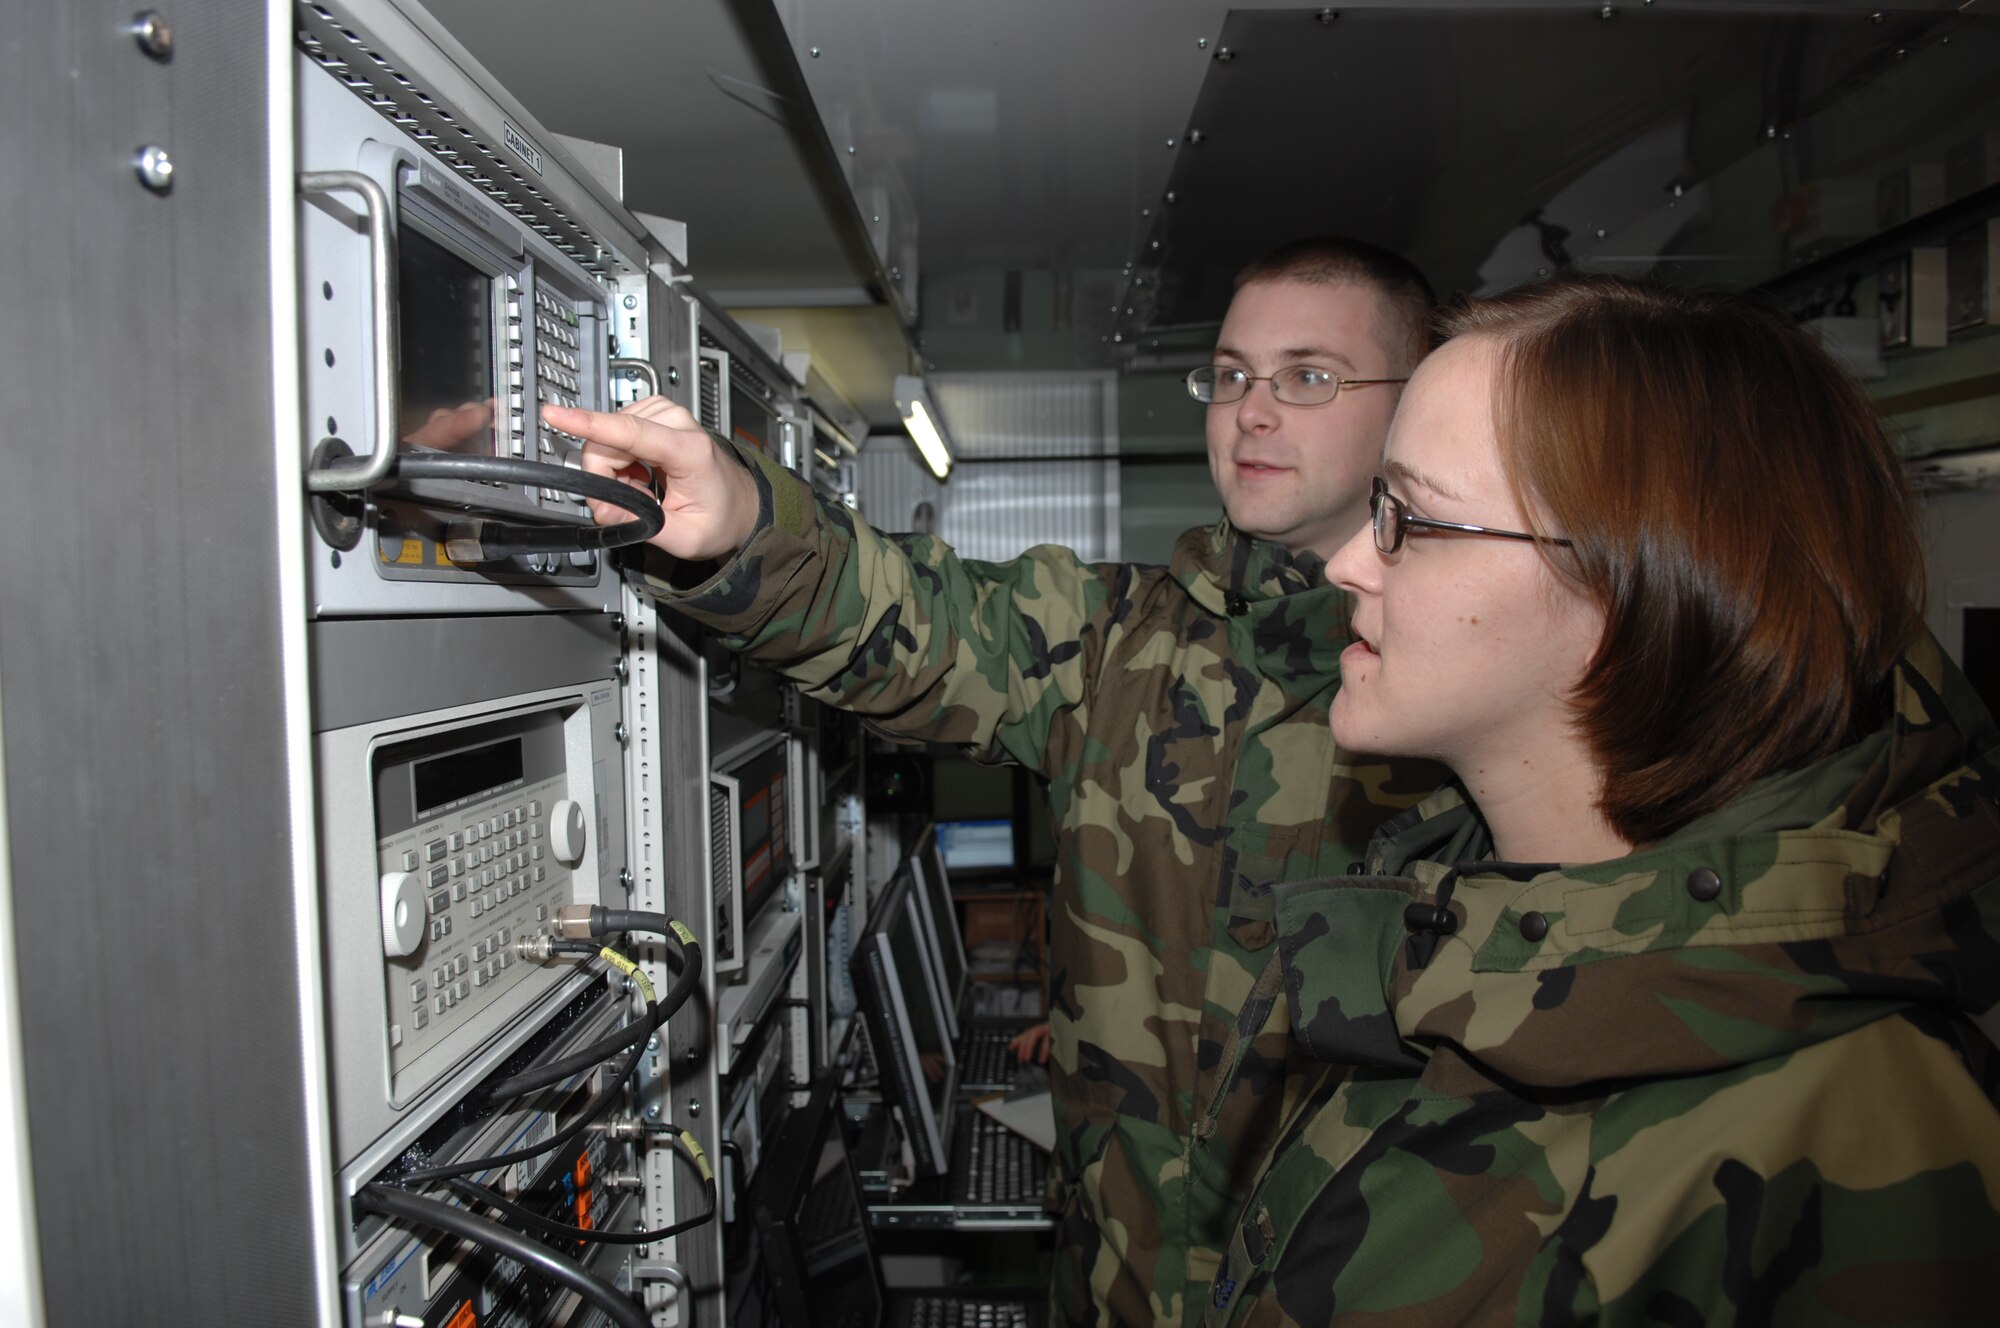 Senior Airman Adam Walters, commercial satellite imagery geospatial analyst, and Staff Sgt. Susanne Dehne, an imagery collection analyst, program the setting on a Spectrum Analyzer.  The analyzer measures the strength of the signal received by the Eagle Vision-1 antenna from commercial satellites.  (U.S. Air Force photo by Senior Master Sgt. Hollis Dawson)